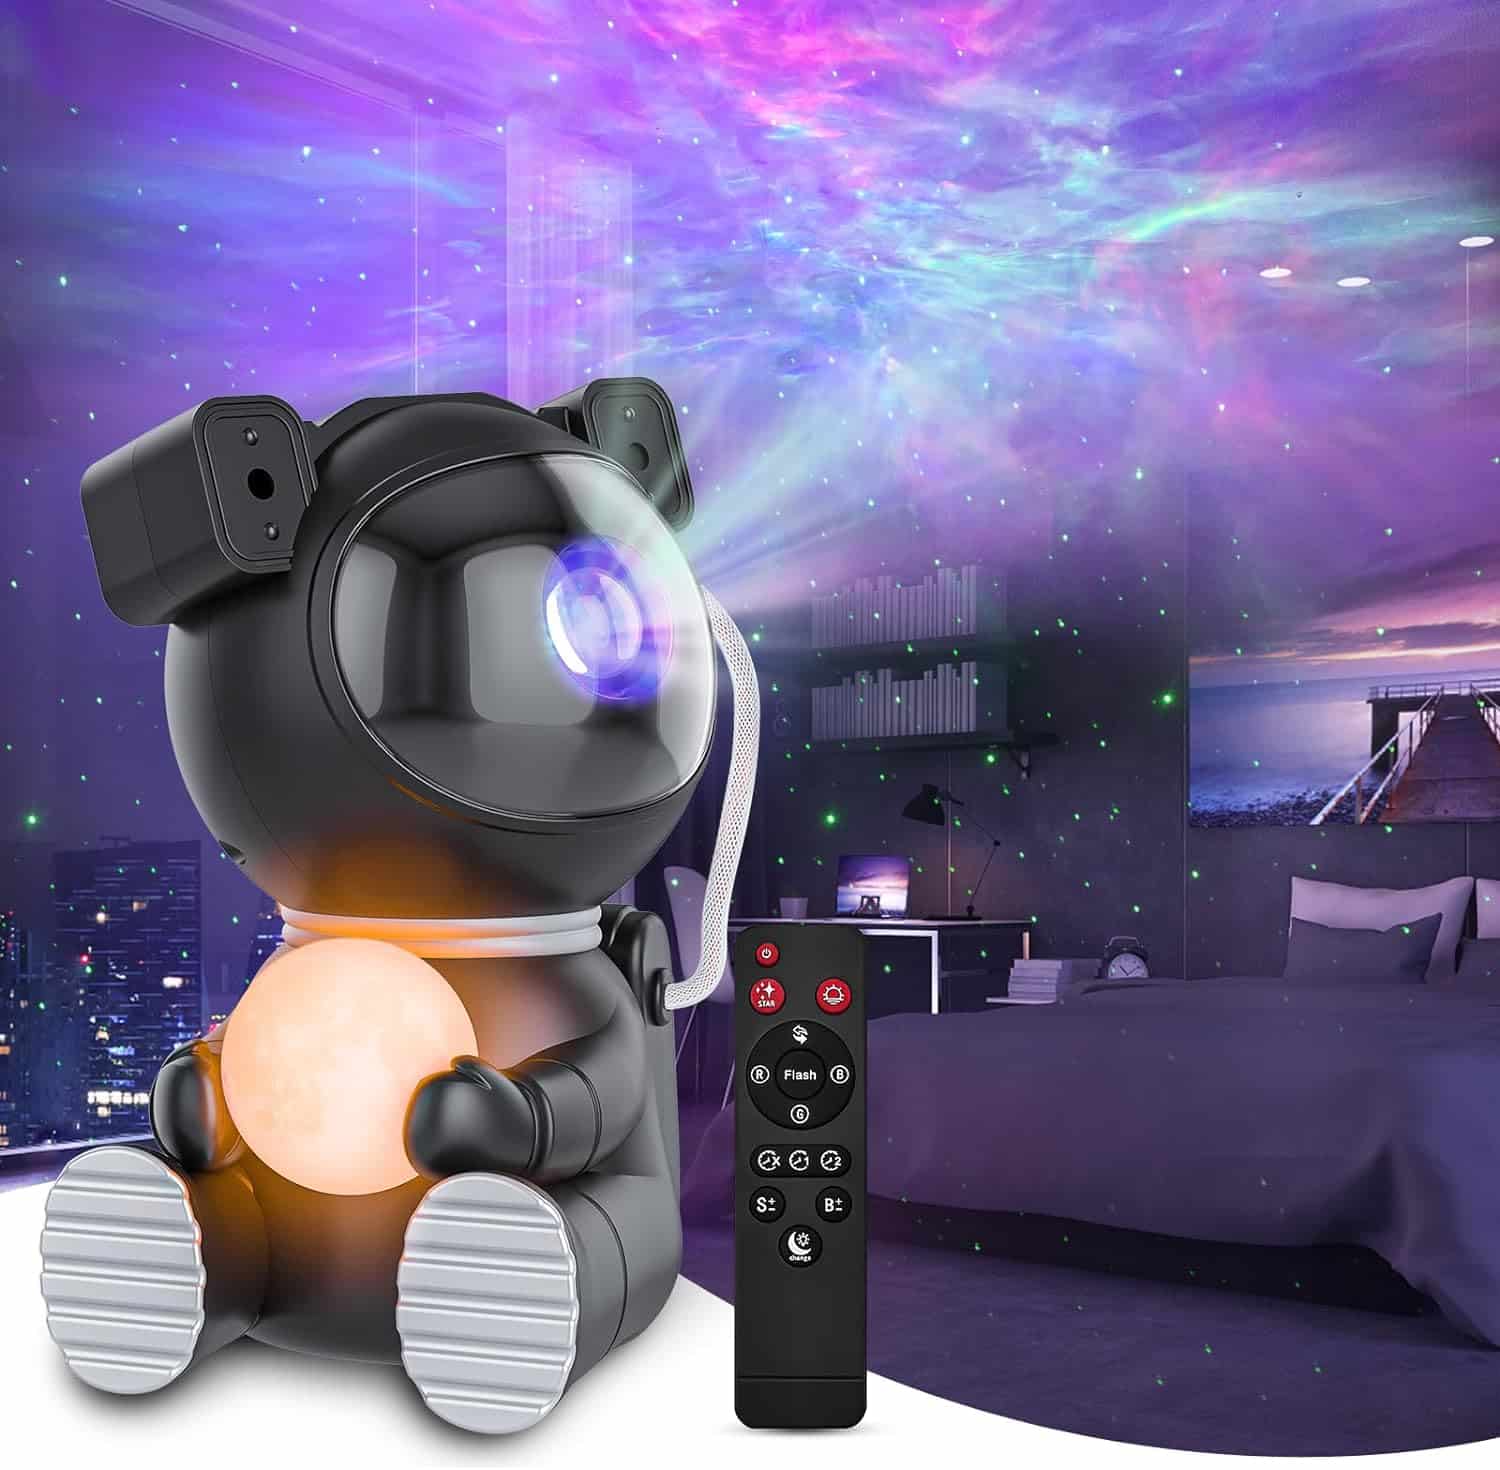 Cayclay Astronaut Light Projector, Galaxy Projector for Bedroom, Star Projector with Moon Lamp, LED Nebula Night Light for Kids, Room Decor, Party, Gift(Black)